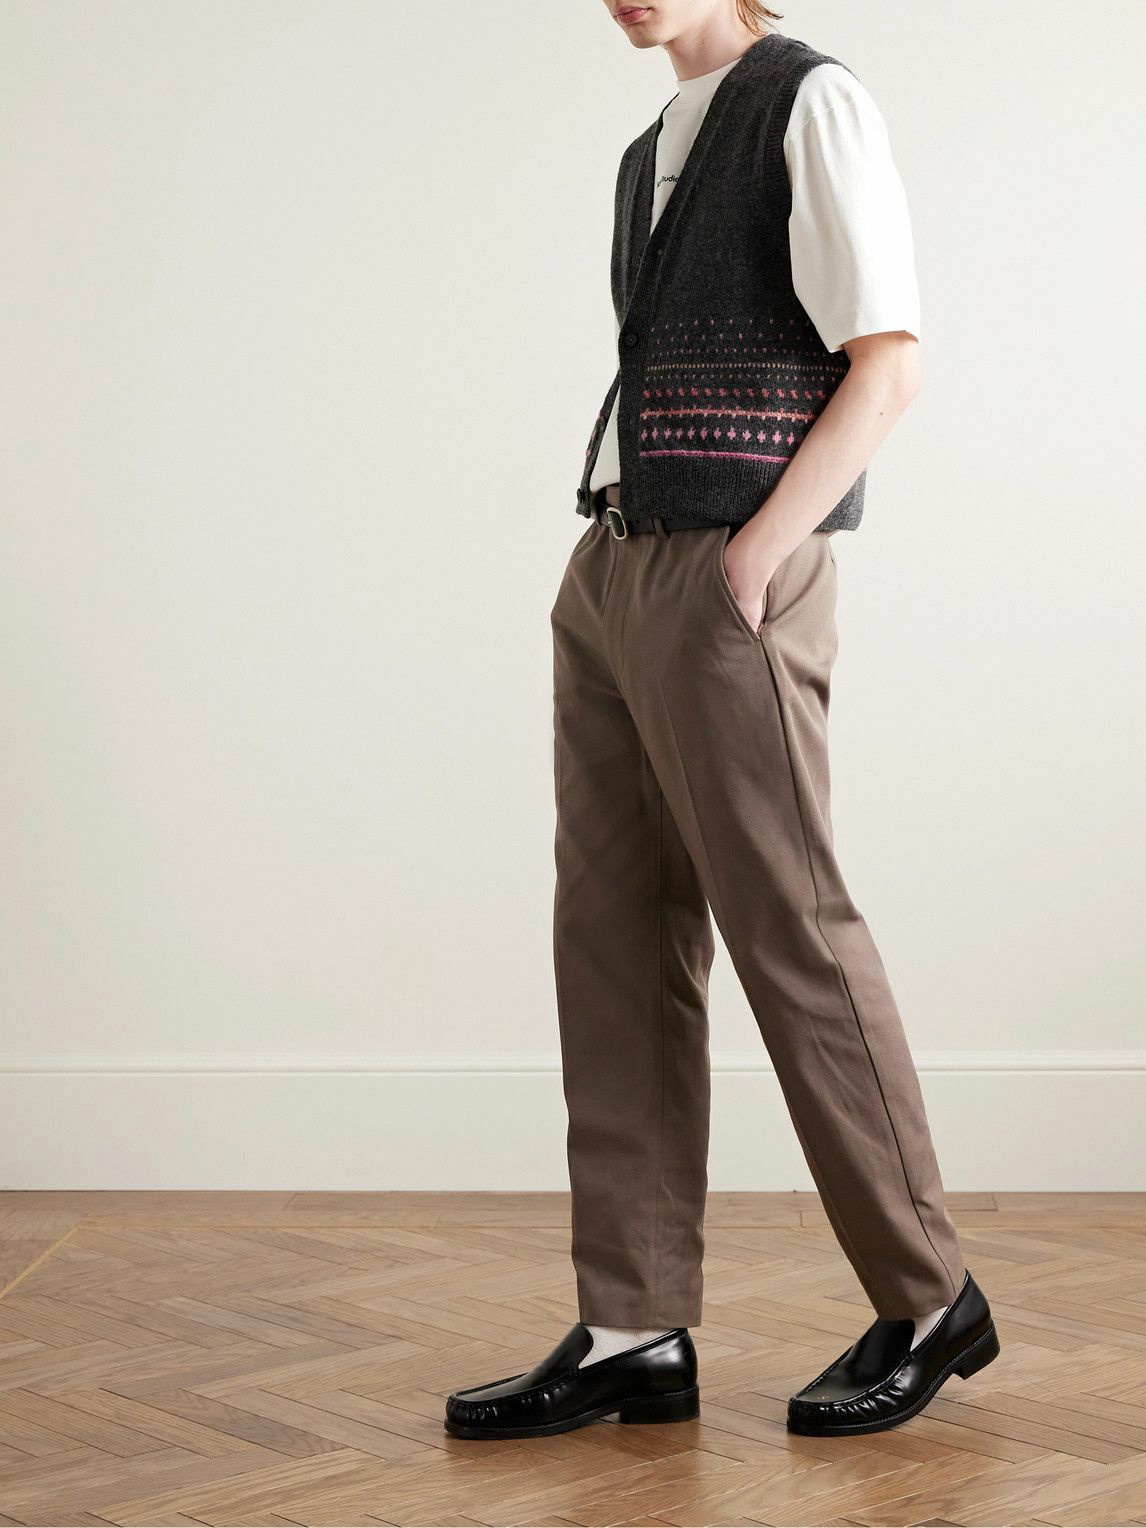 Acne Studios - Ayonne Straight-Leg Cotton-Blend Twill Trousers - Brown